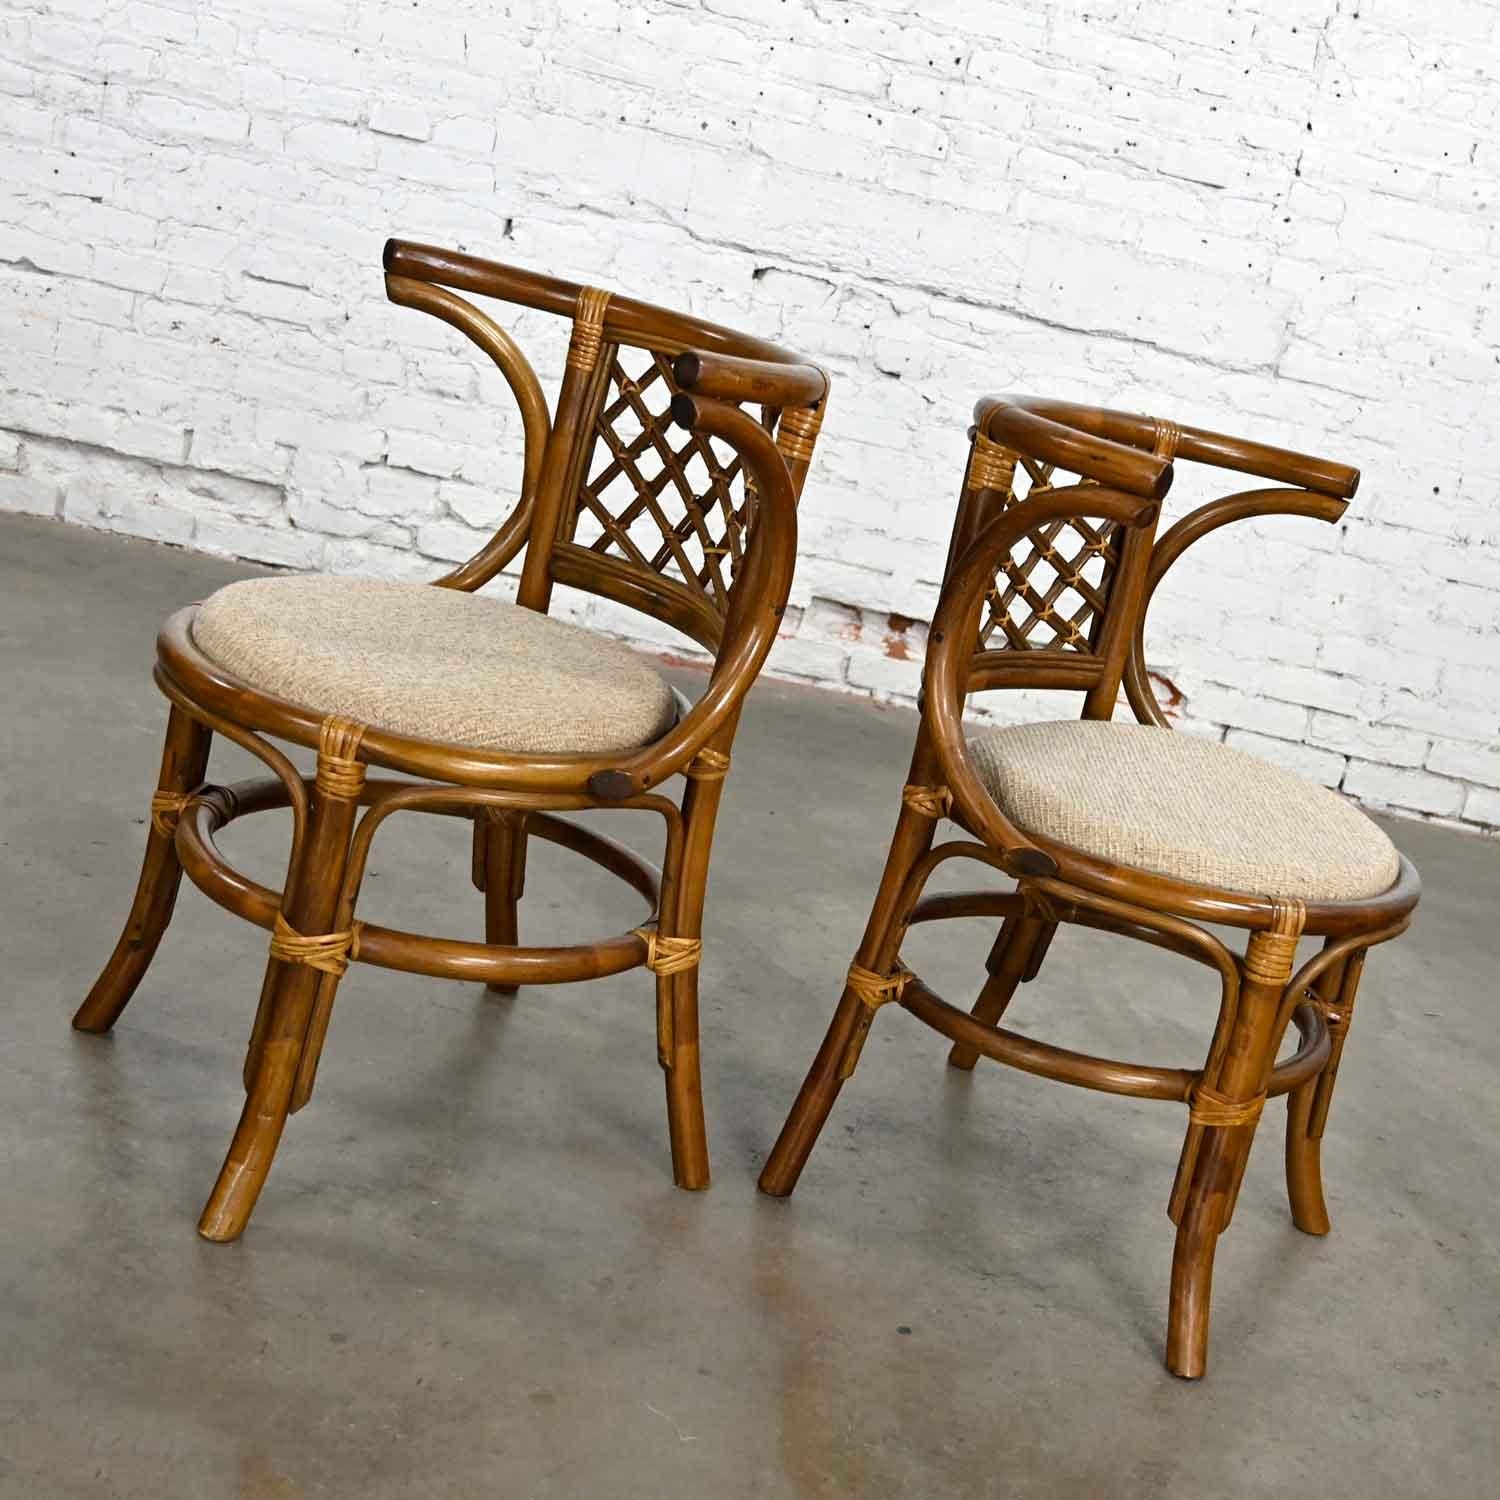 Campaign Vintage Rattan & Cane Pair of Side Chairs Woven Diamond Yoke Back Off-White Twee